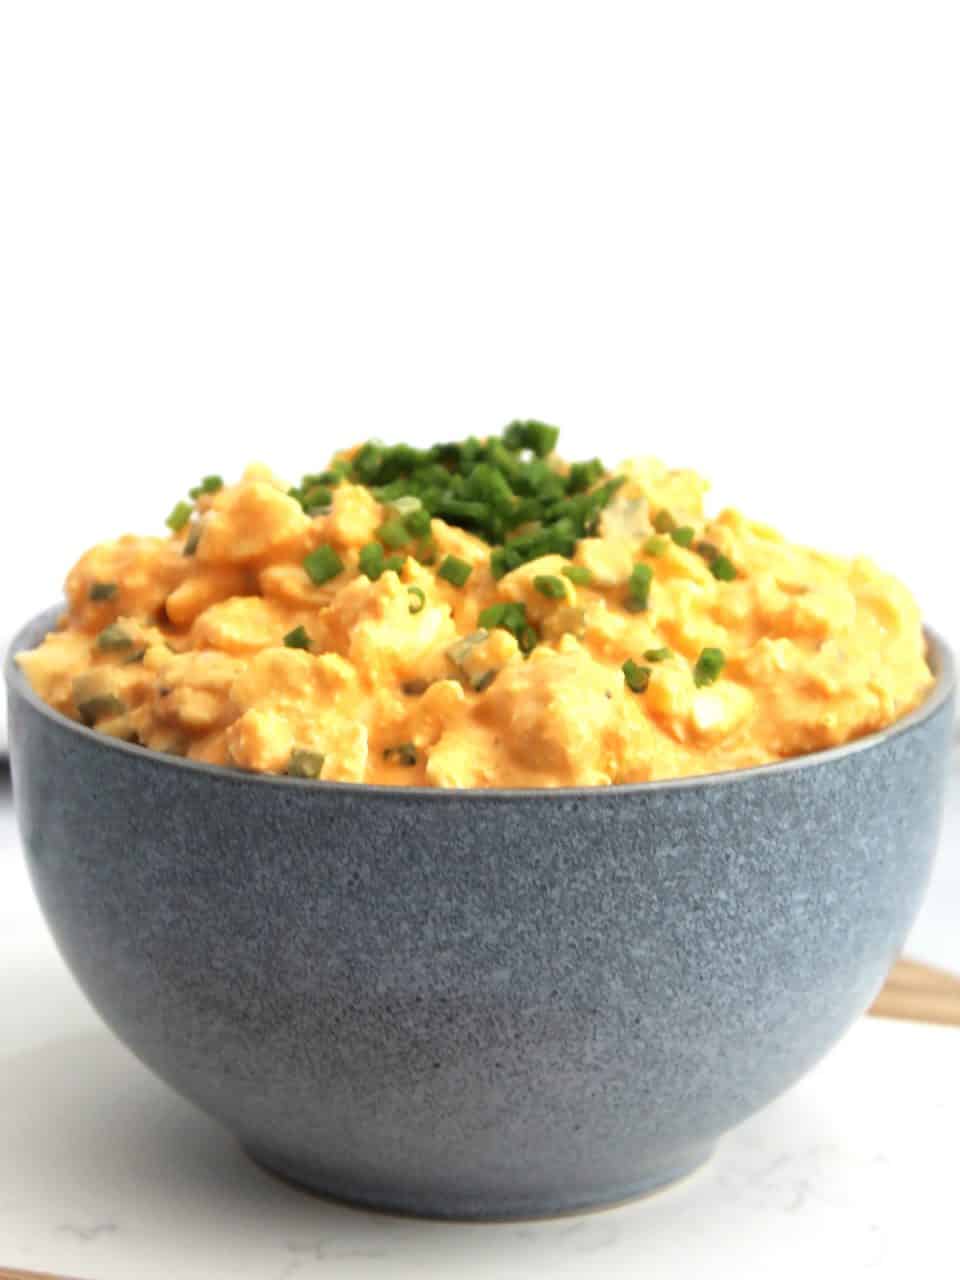 Buffalo egg salad in a bowl with fresh chives on top.